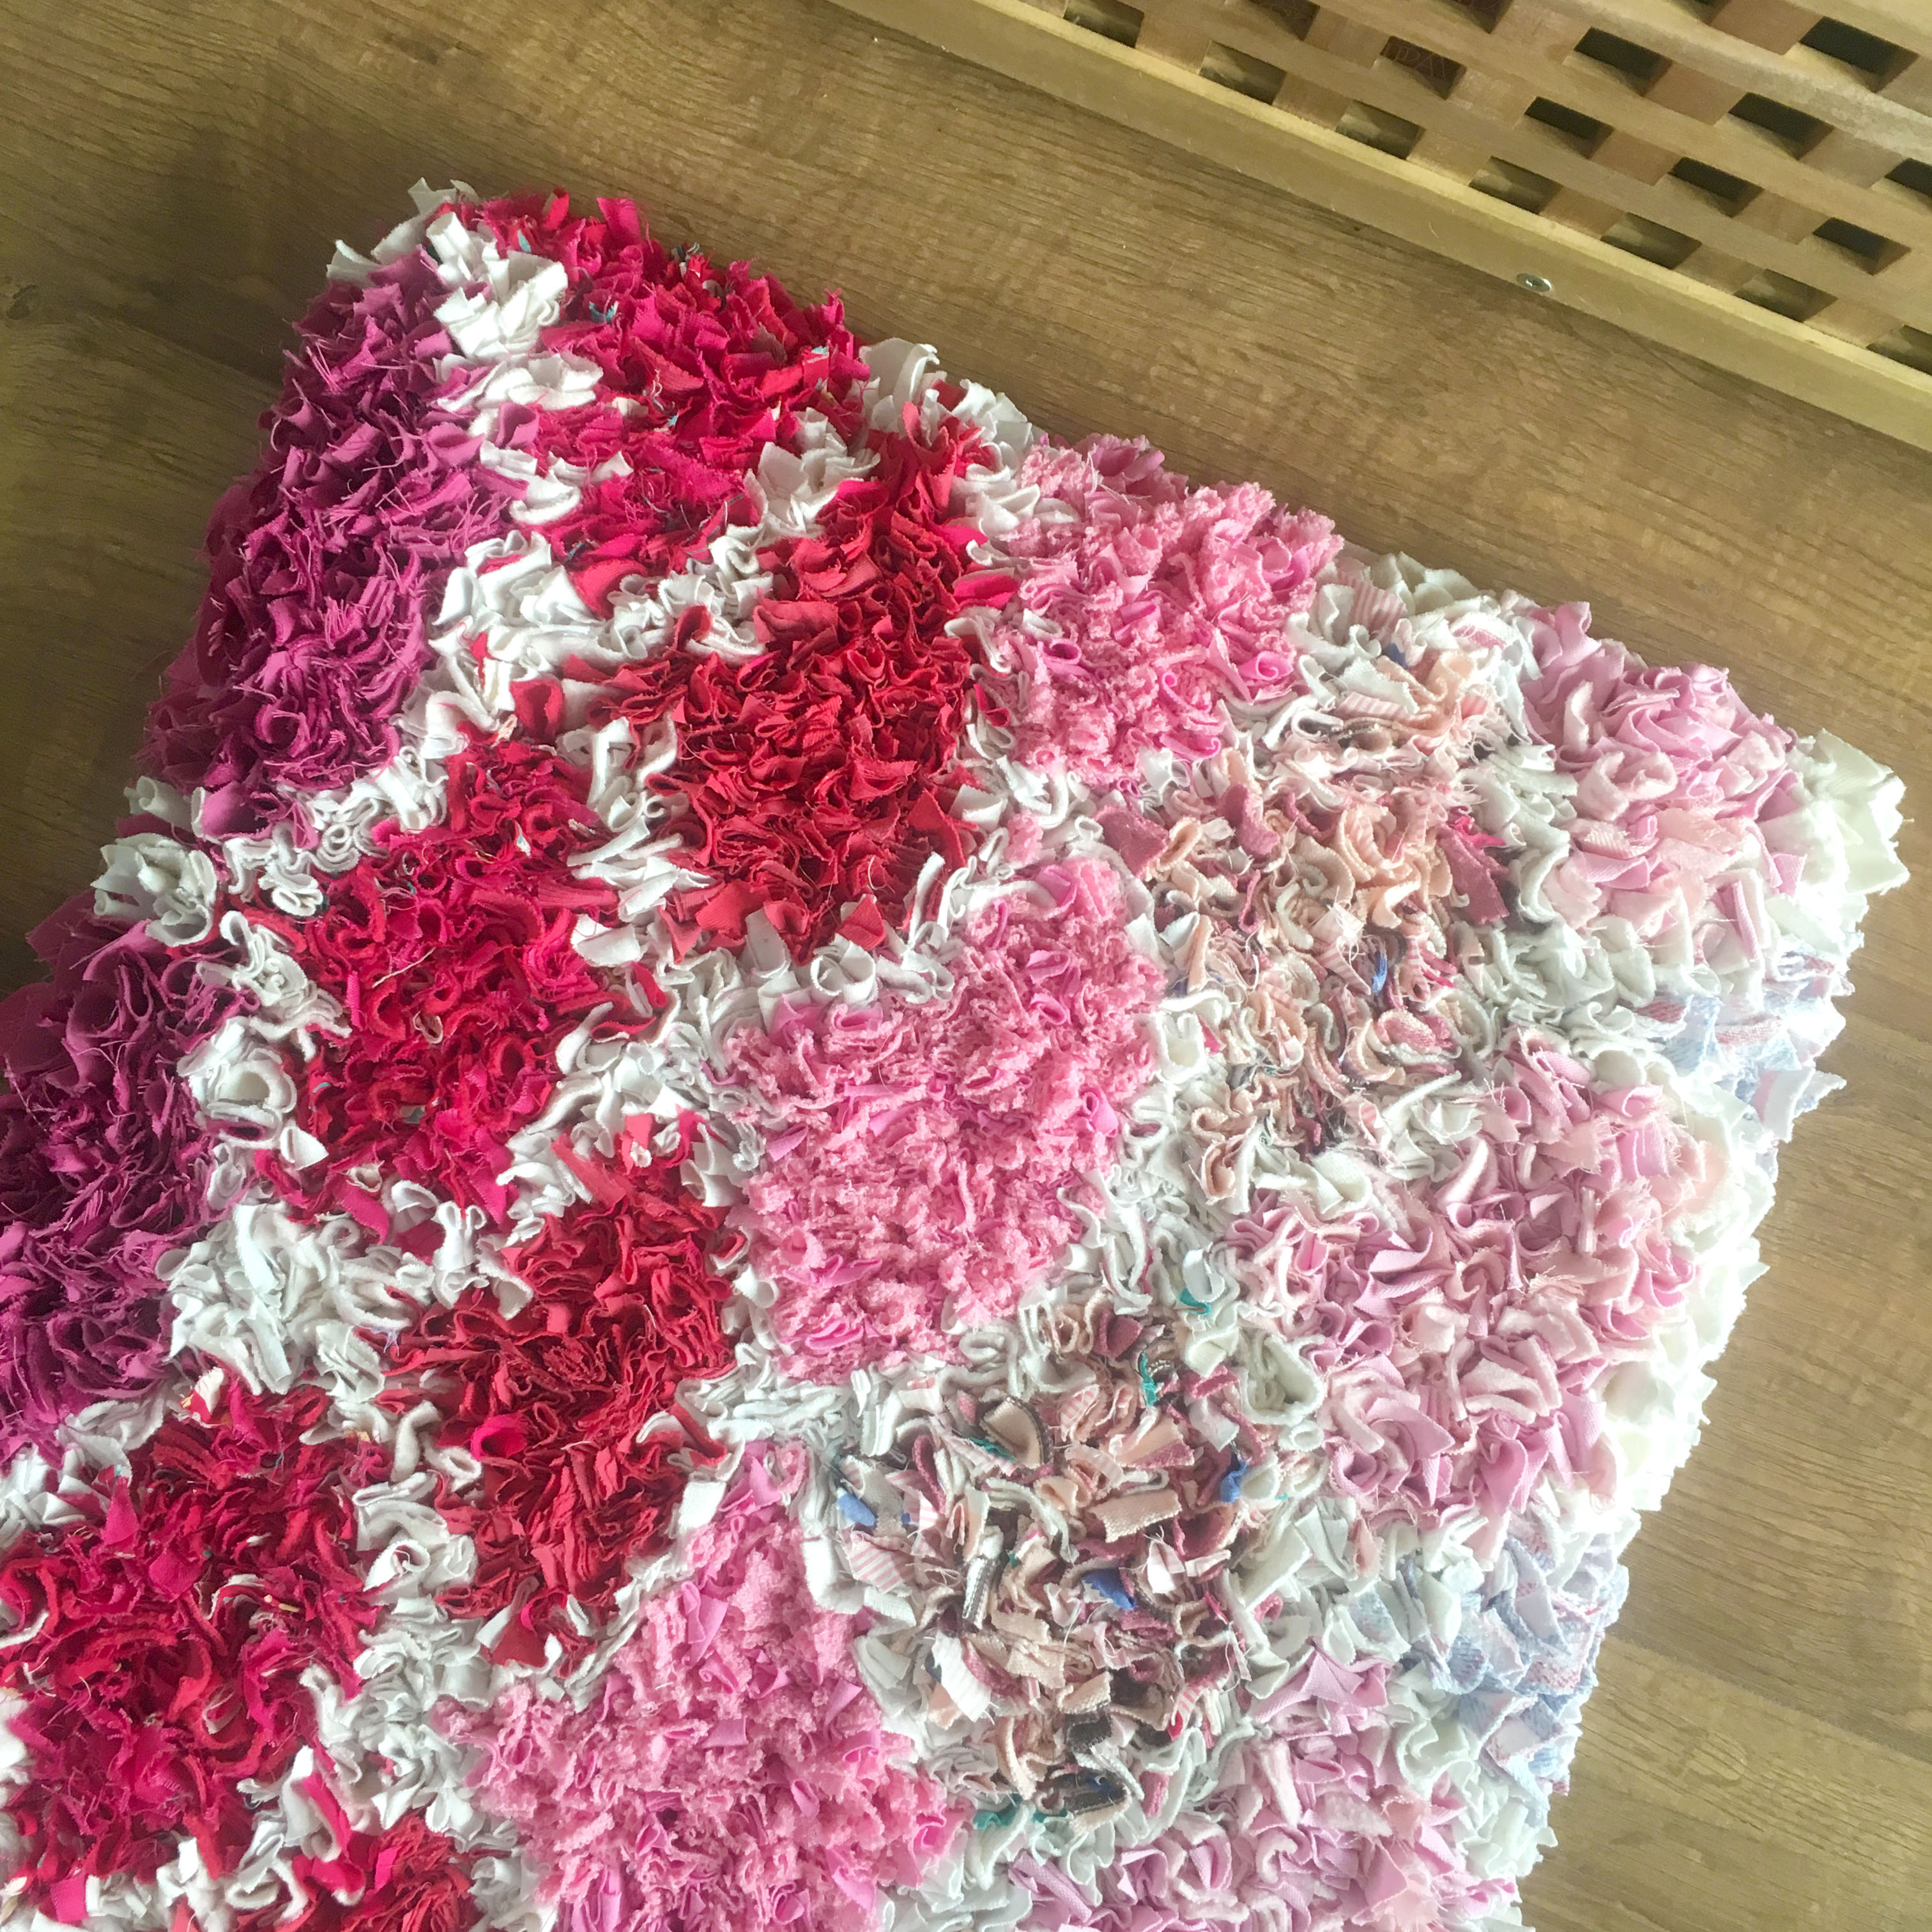 Pink rag rug in scallop design with white borders made of old t-shirts